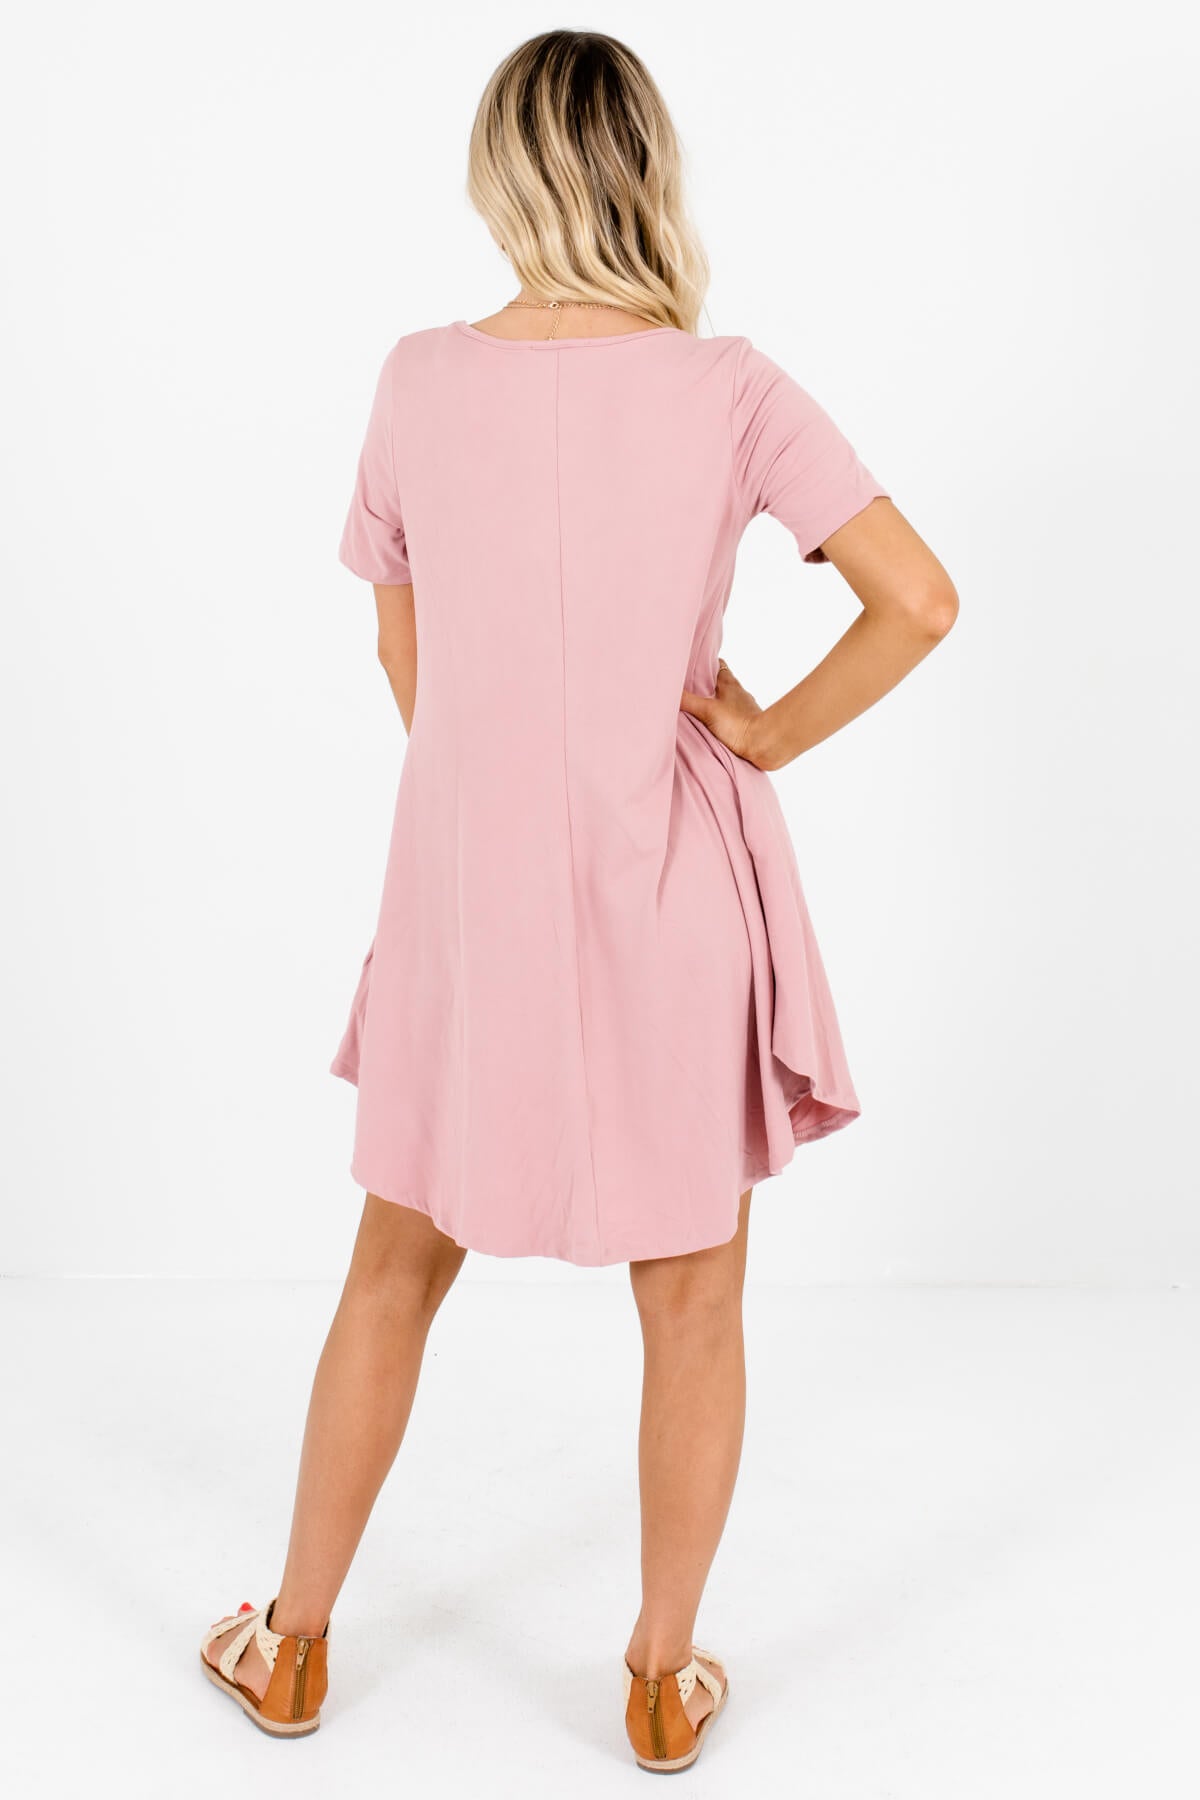 Pink Rounded Hem Super Soft Mini Dresses with Pockets and Short Sleeves